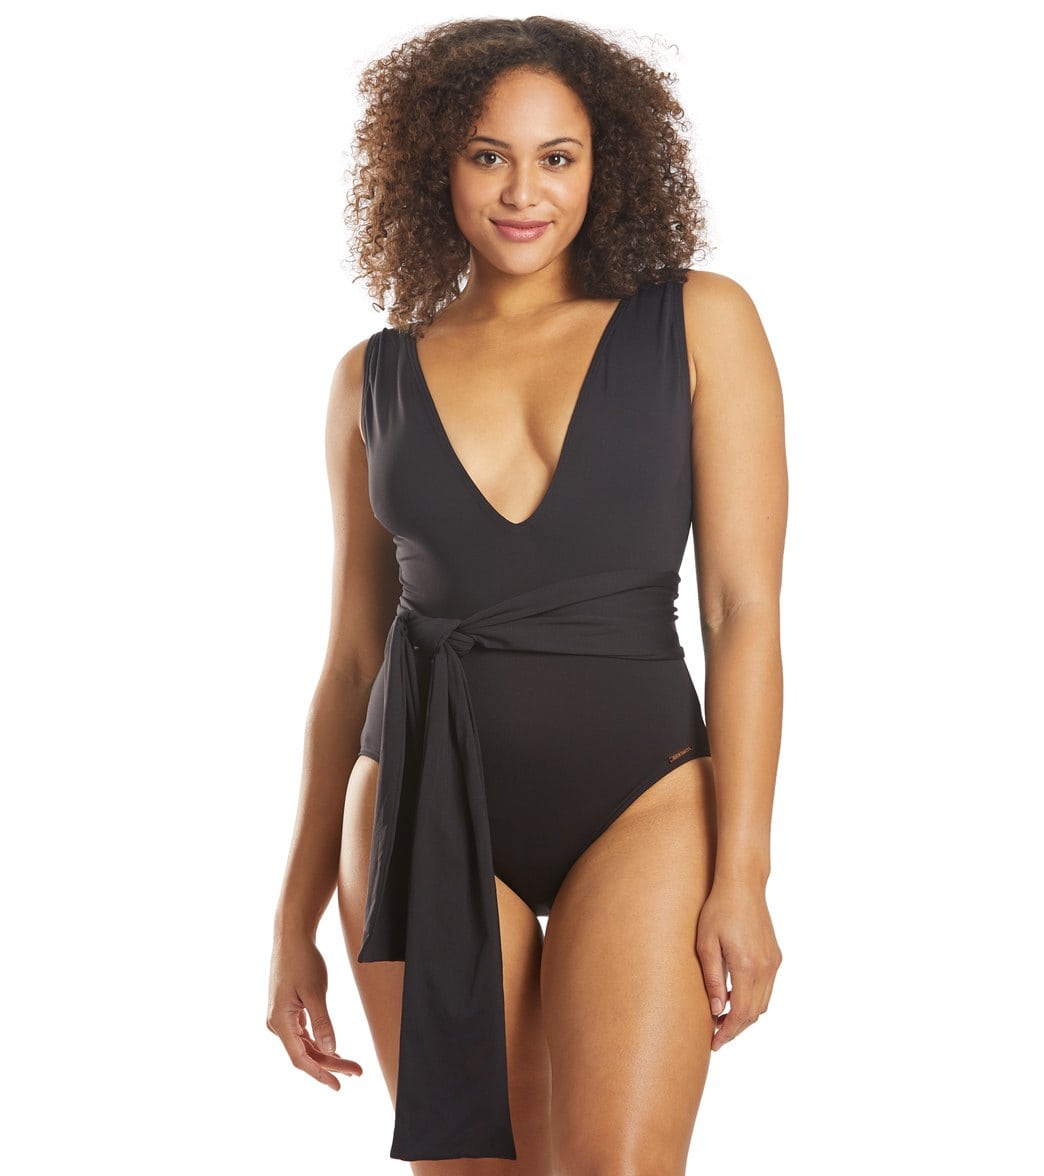 Vince Camuto Tropic Tones Belted Plunge One Piece Swimsuit - Black 4 - Swimoutlet.com